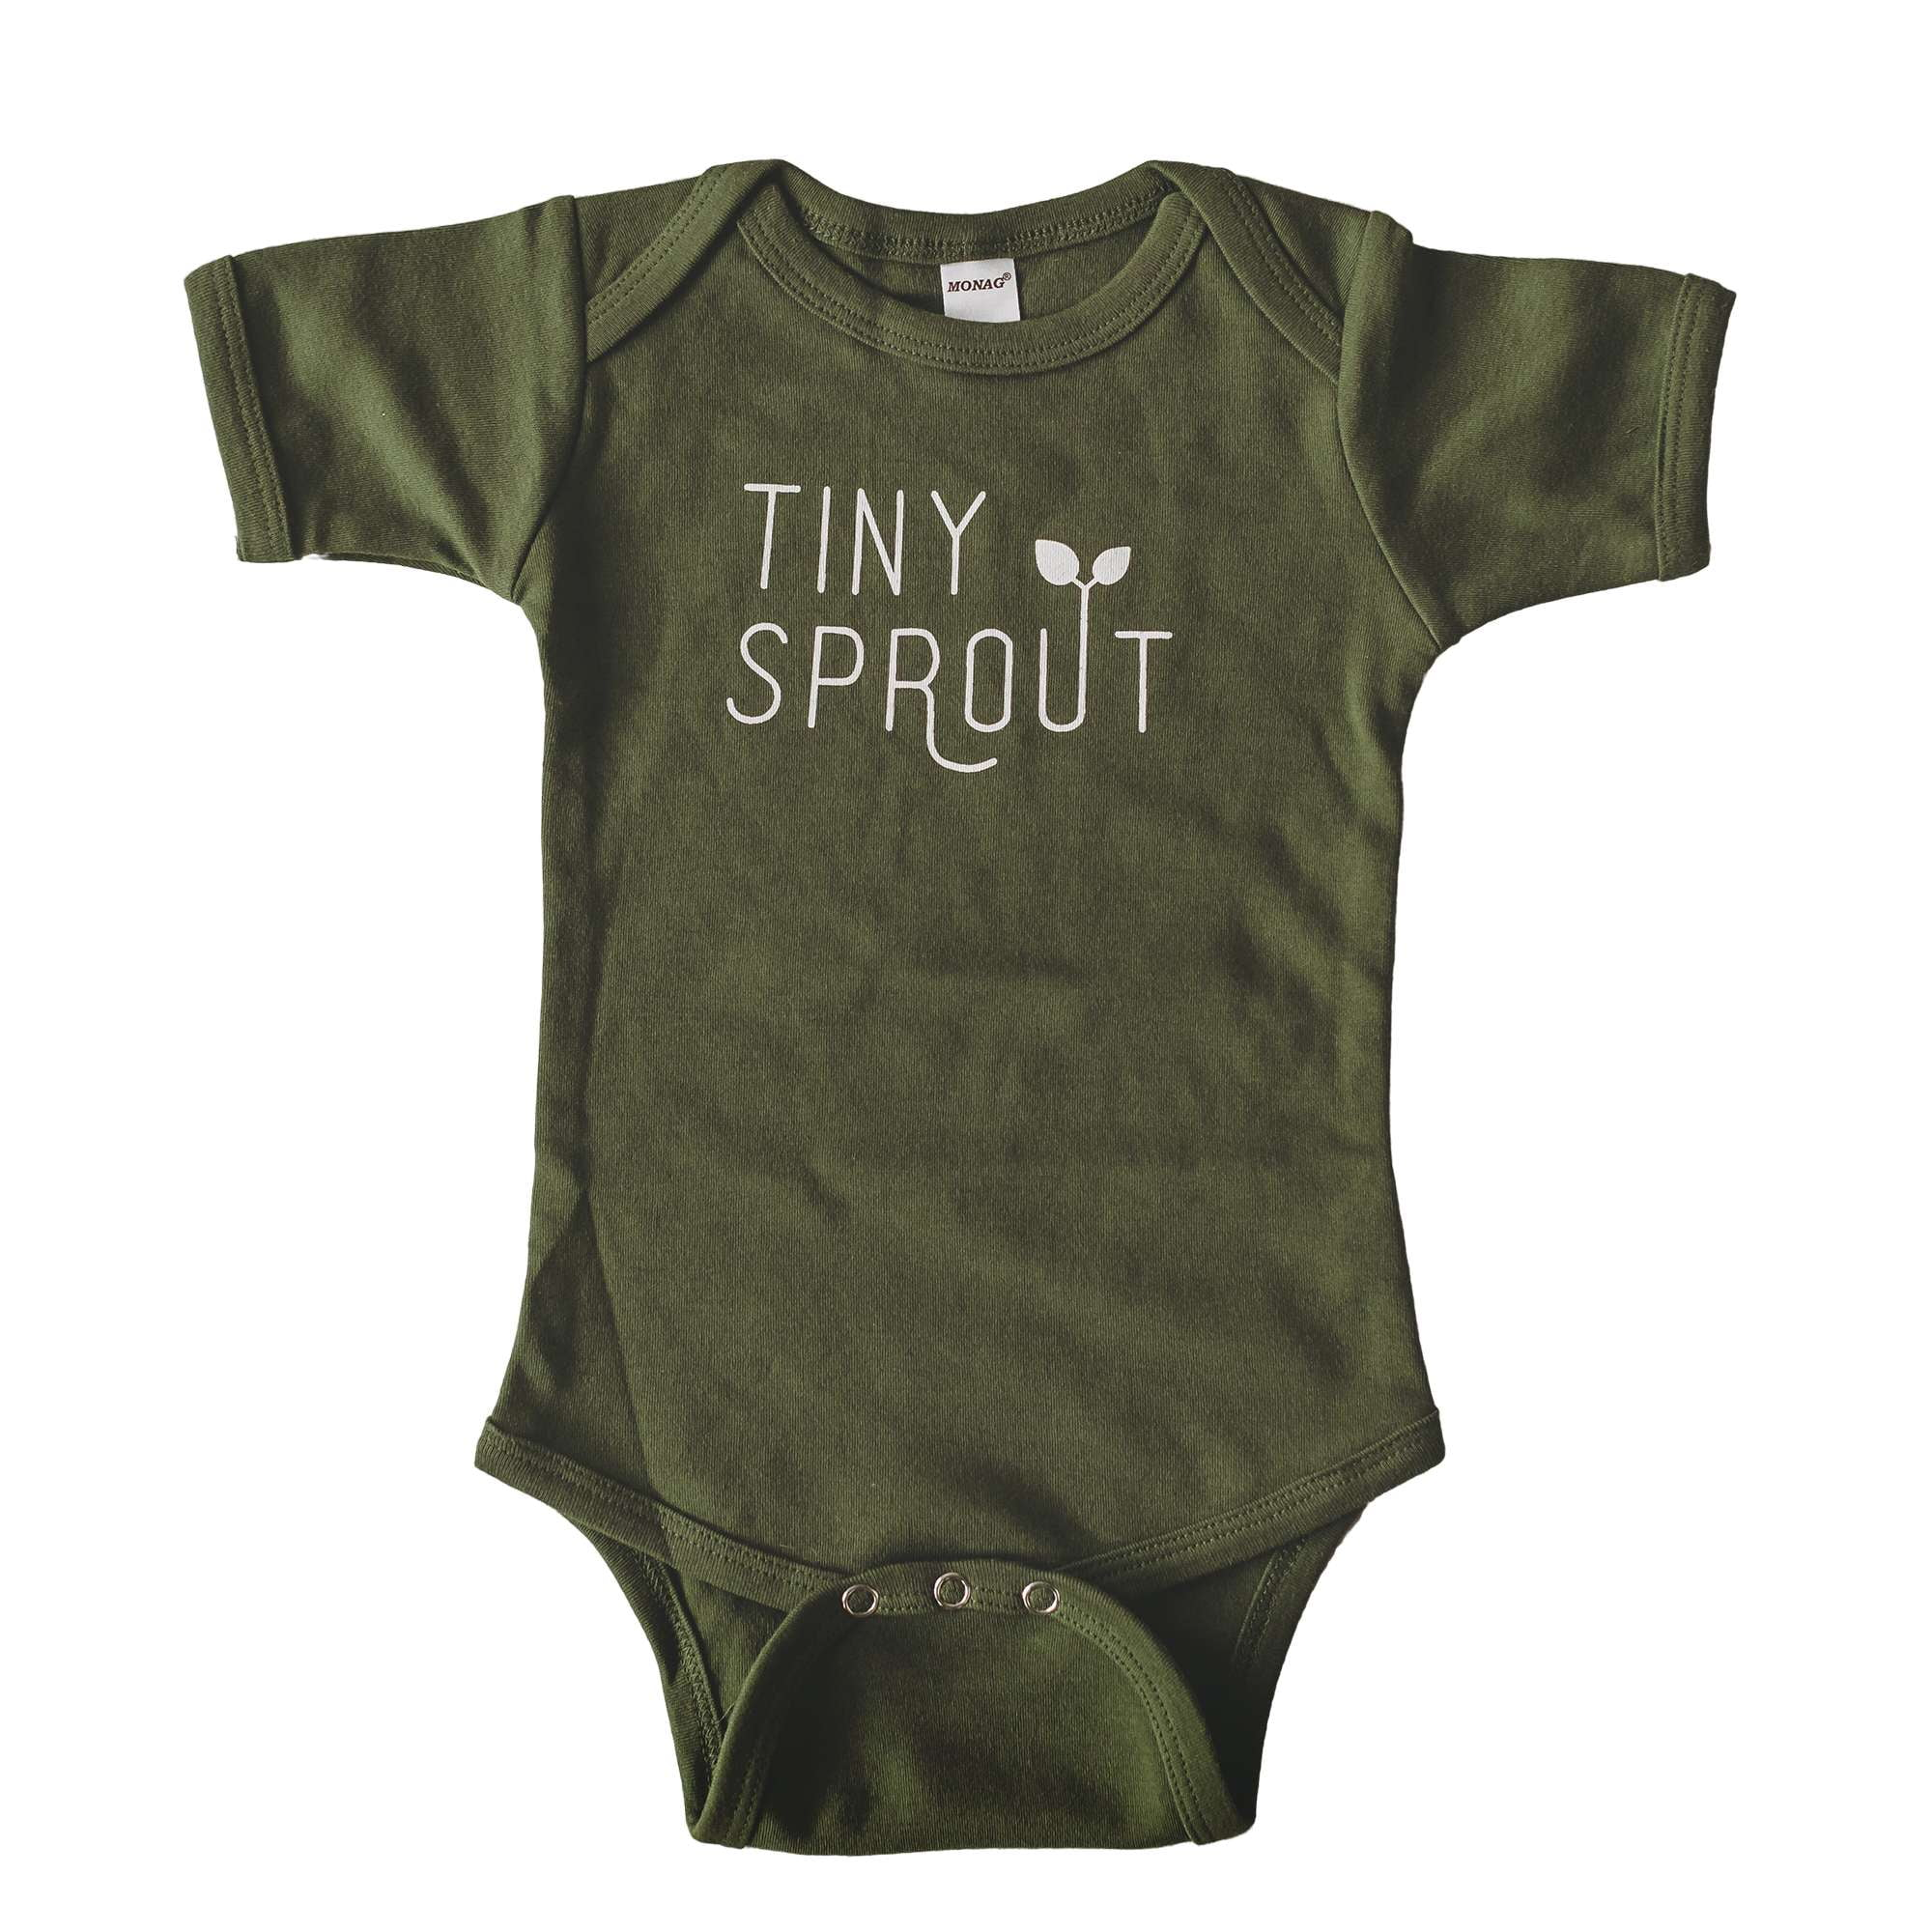 PRE-ORDER - Tiny Sprout baby bodysuit / onesie - Hilland sonconstruction.